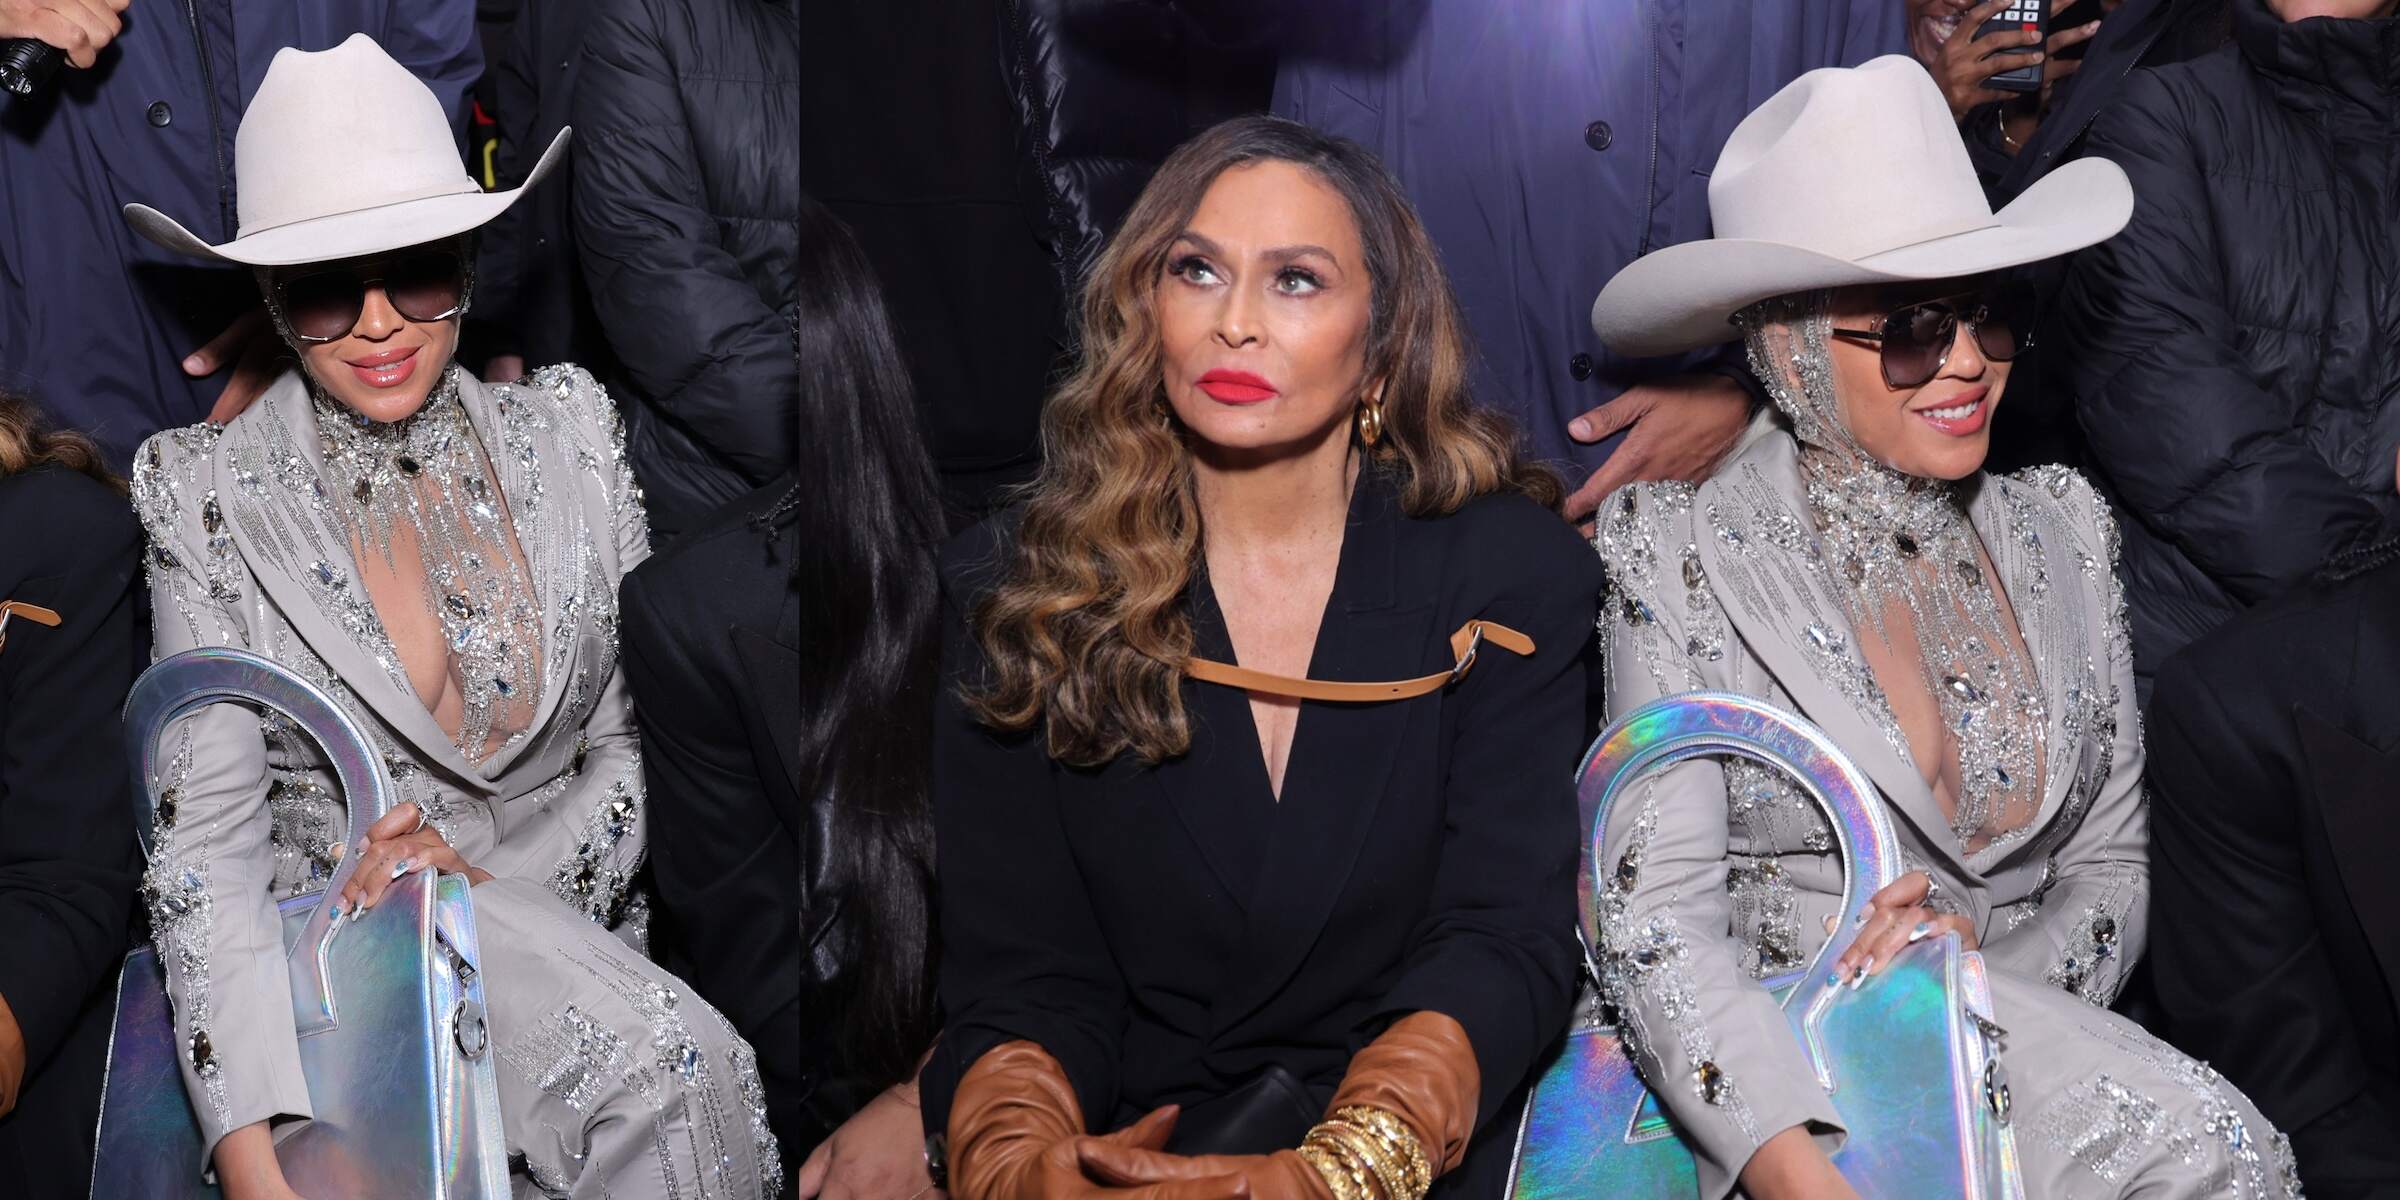 Tina Knowles and Beyoncé sit front row at the Luar fashion show